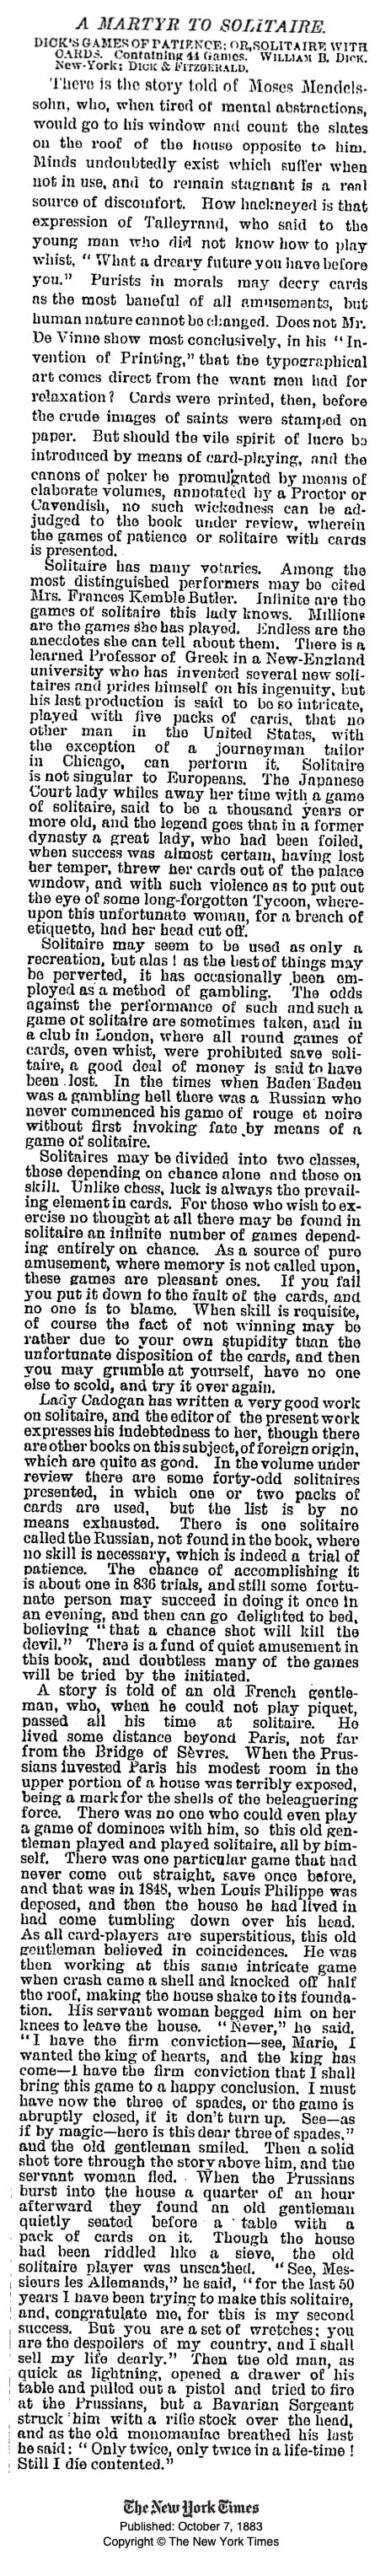 A Martyr to Solitaire - The New York Times - 1883 - full article screen